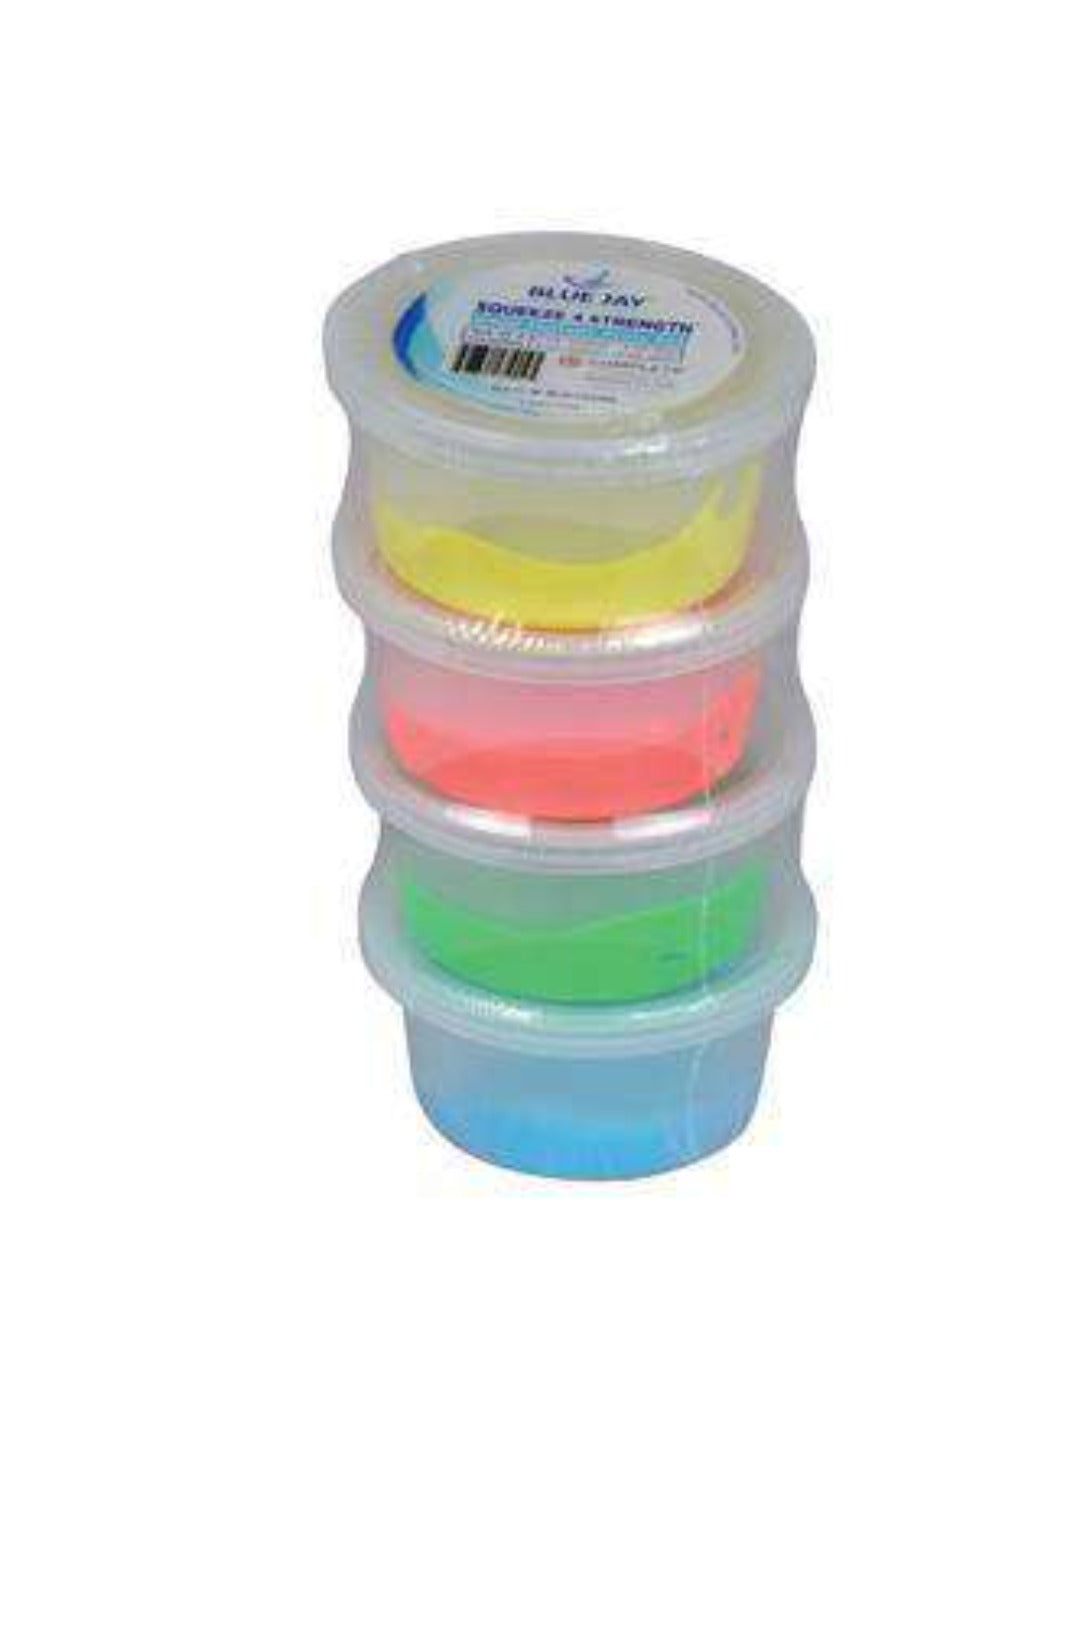 Blue Jay Squeeze 4 Strength Hand Therapy Putty - 4 Pack - Senior.com Hand Exercisers